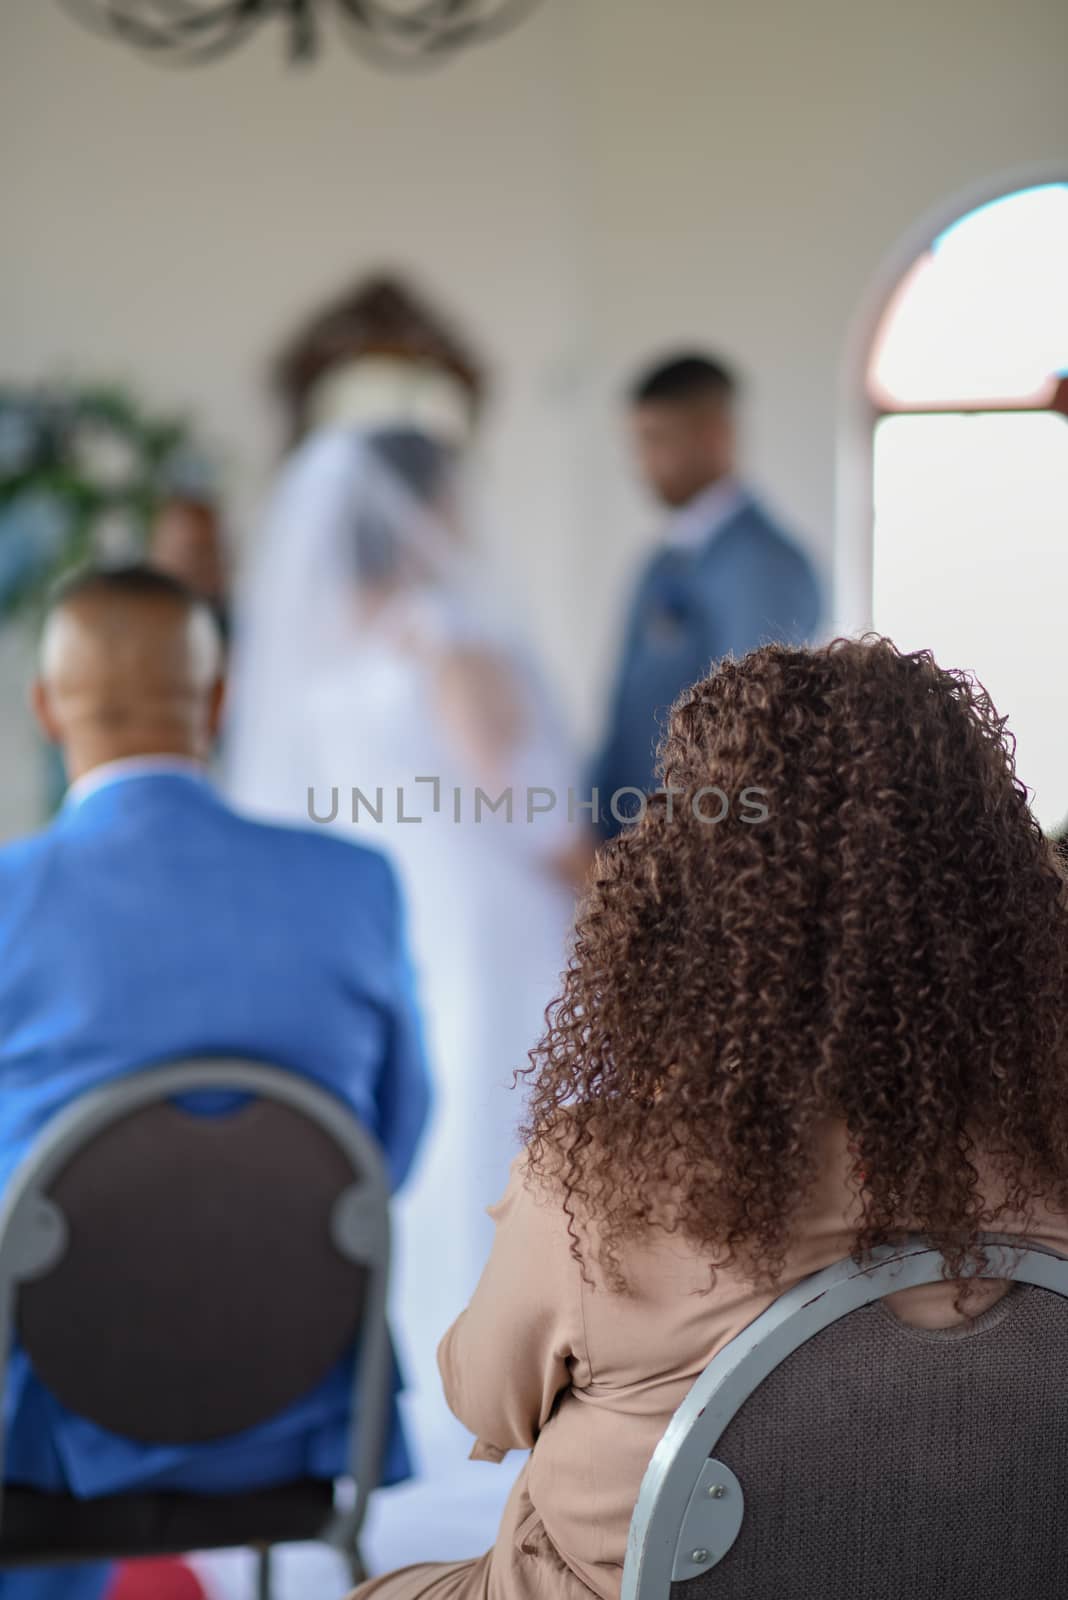 Blurred background of couple getting married